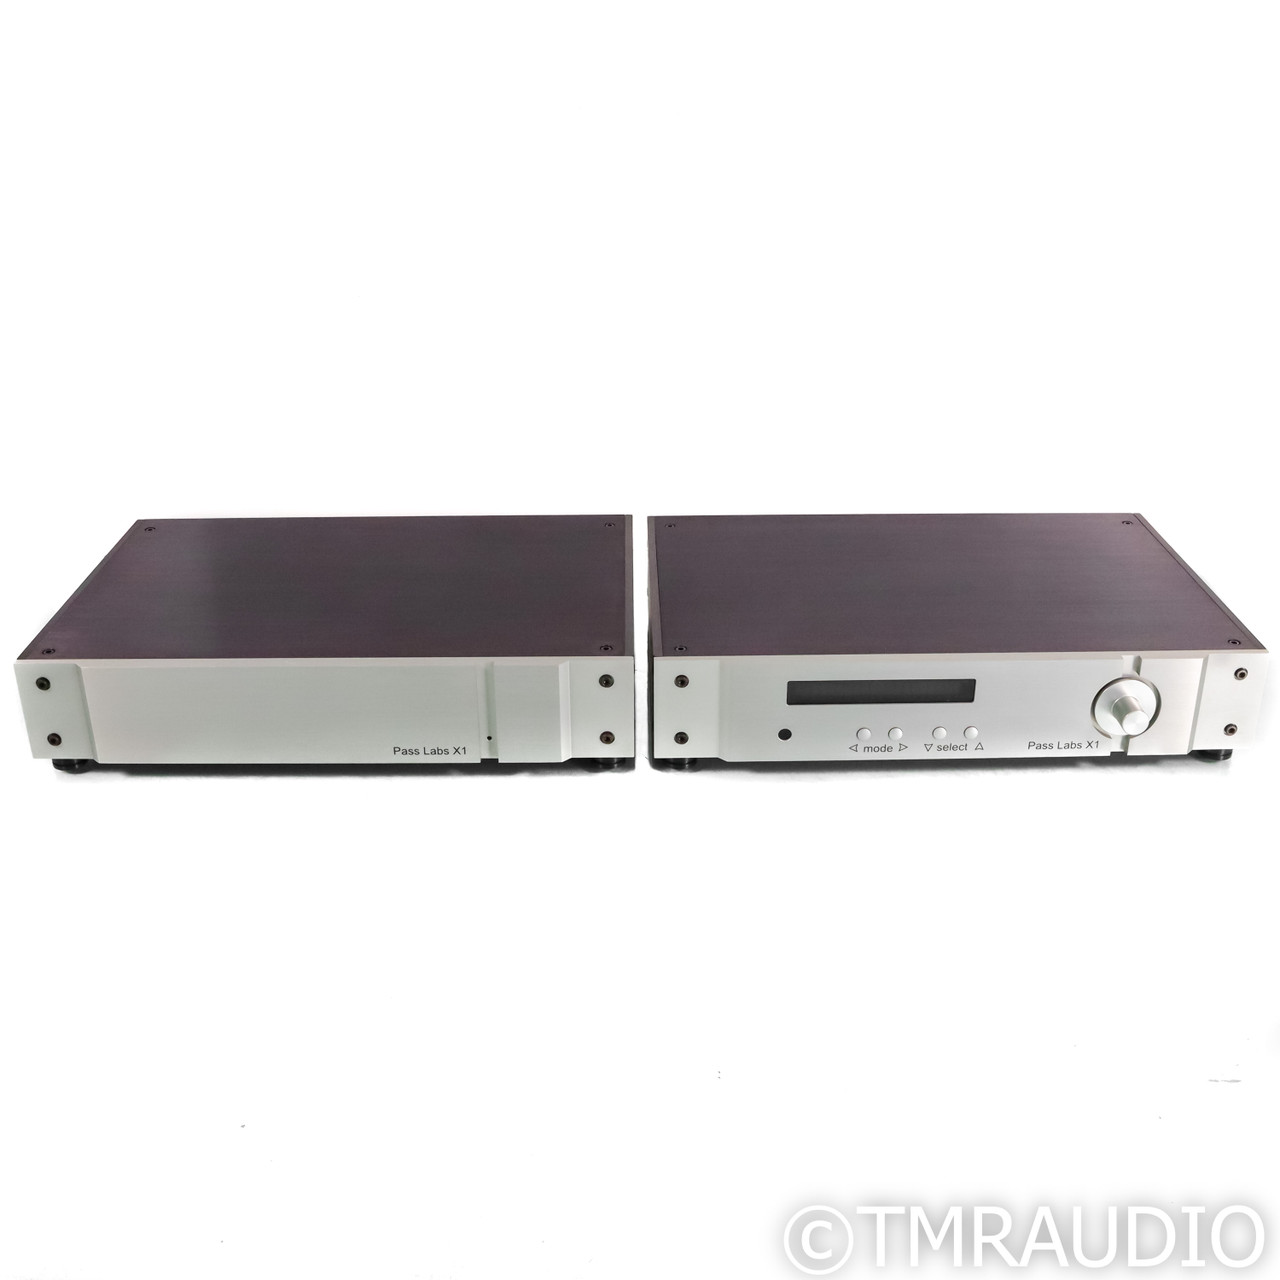 Pass Labs X1 Stereo Preamplifier  (64801) 2